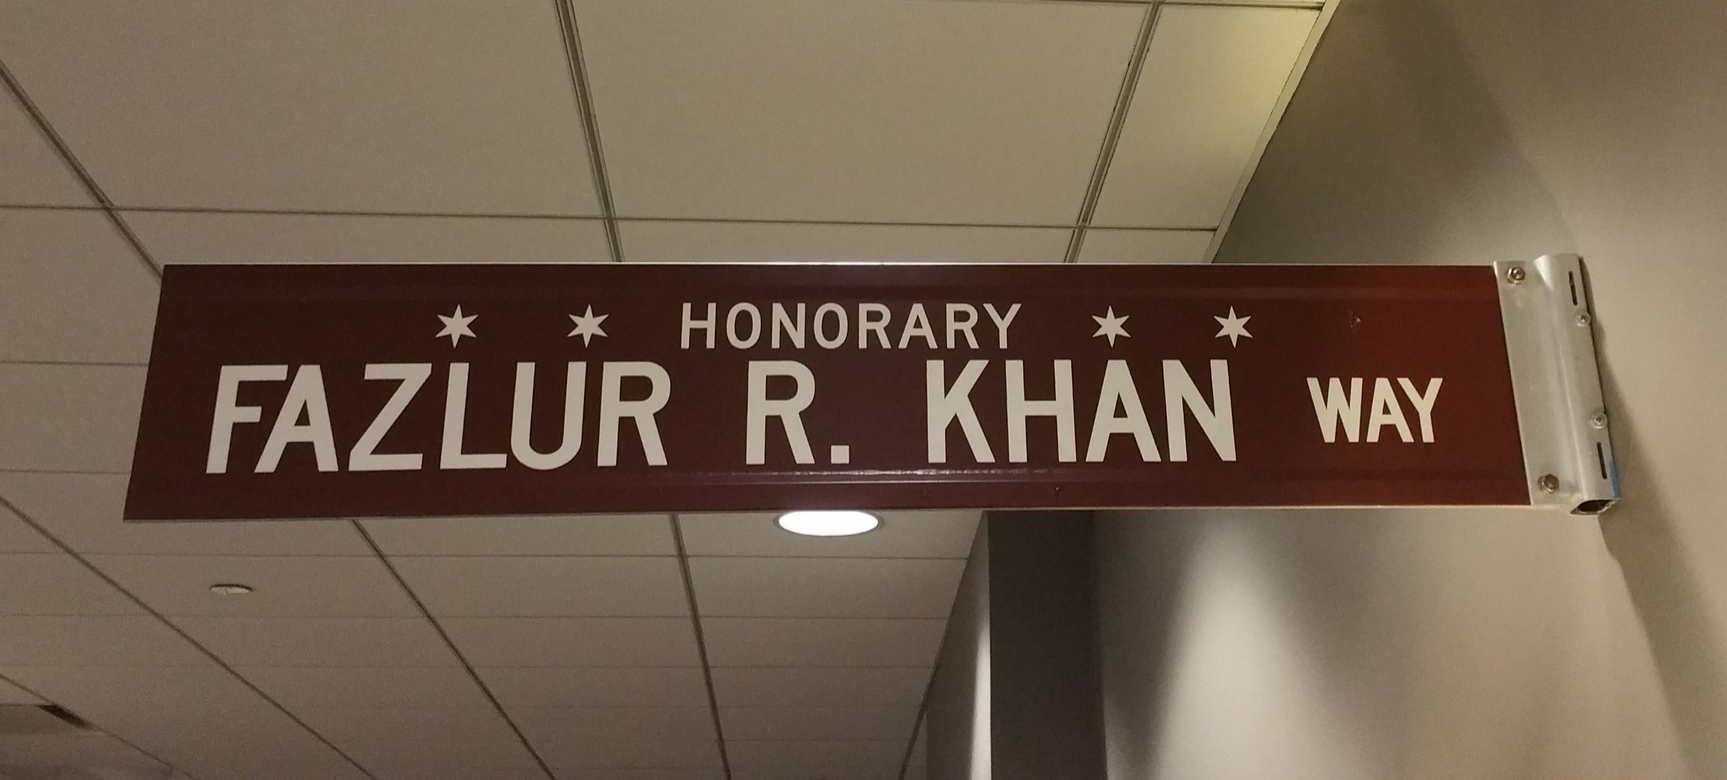 Fazlur R Khan Way - Honorary Chicago. Structural Engineer who designed Sears (Willis) Tower